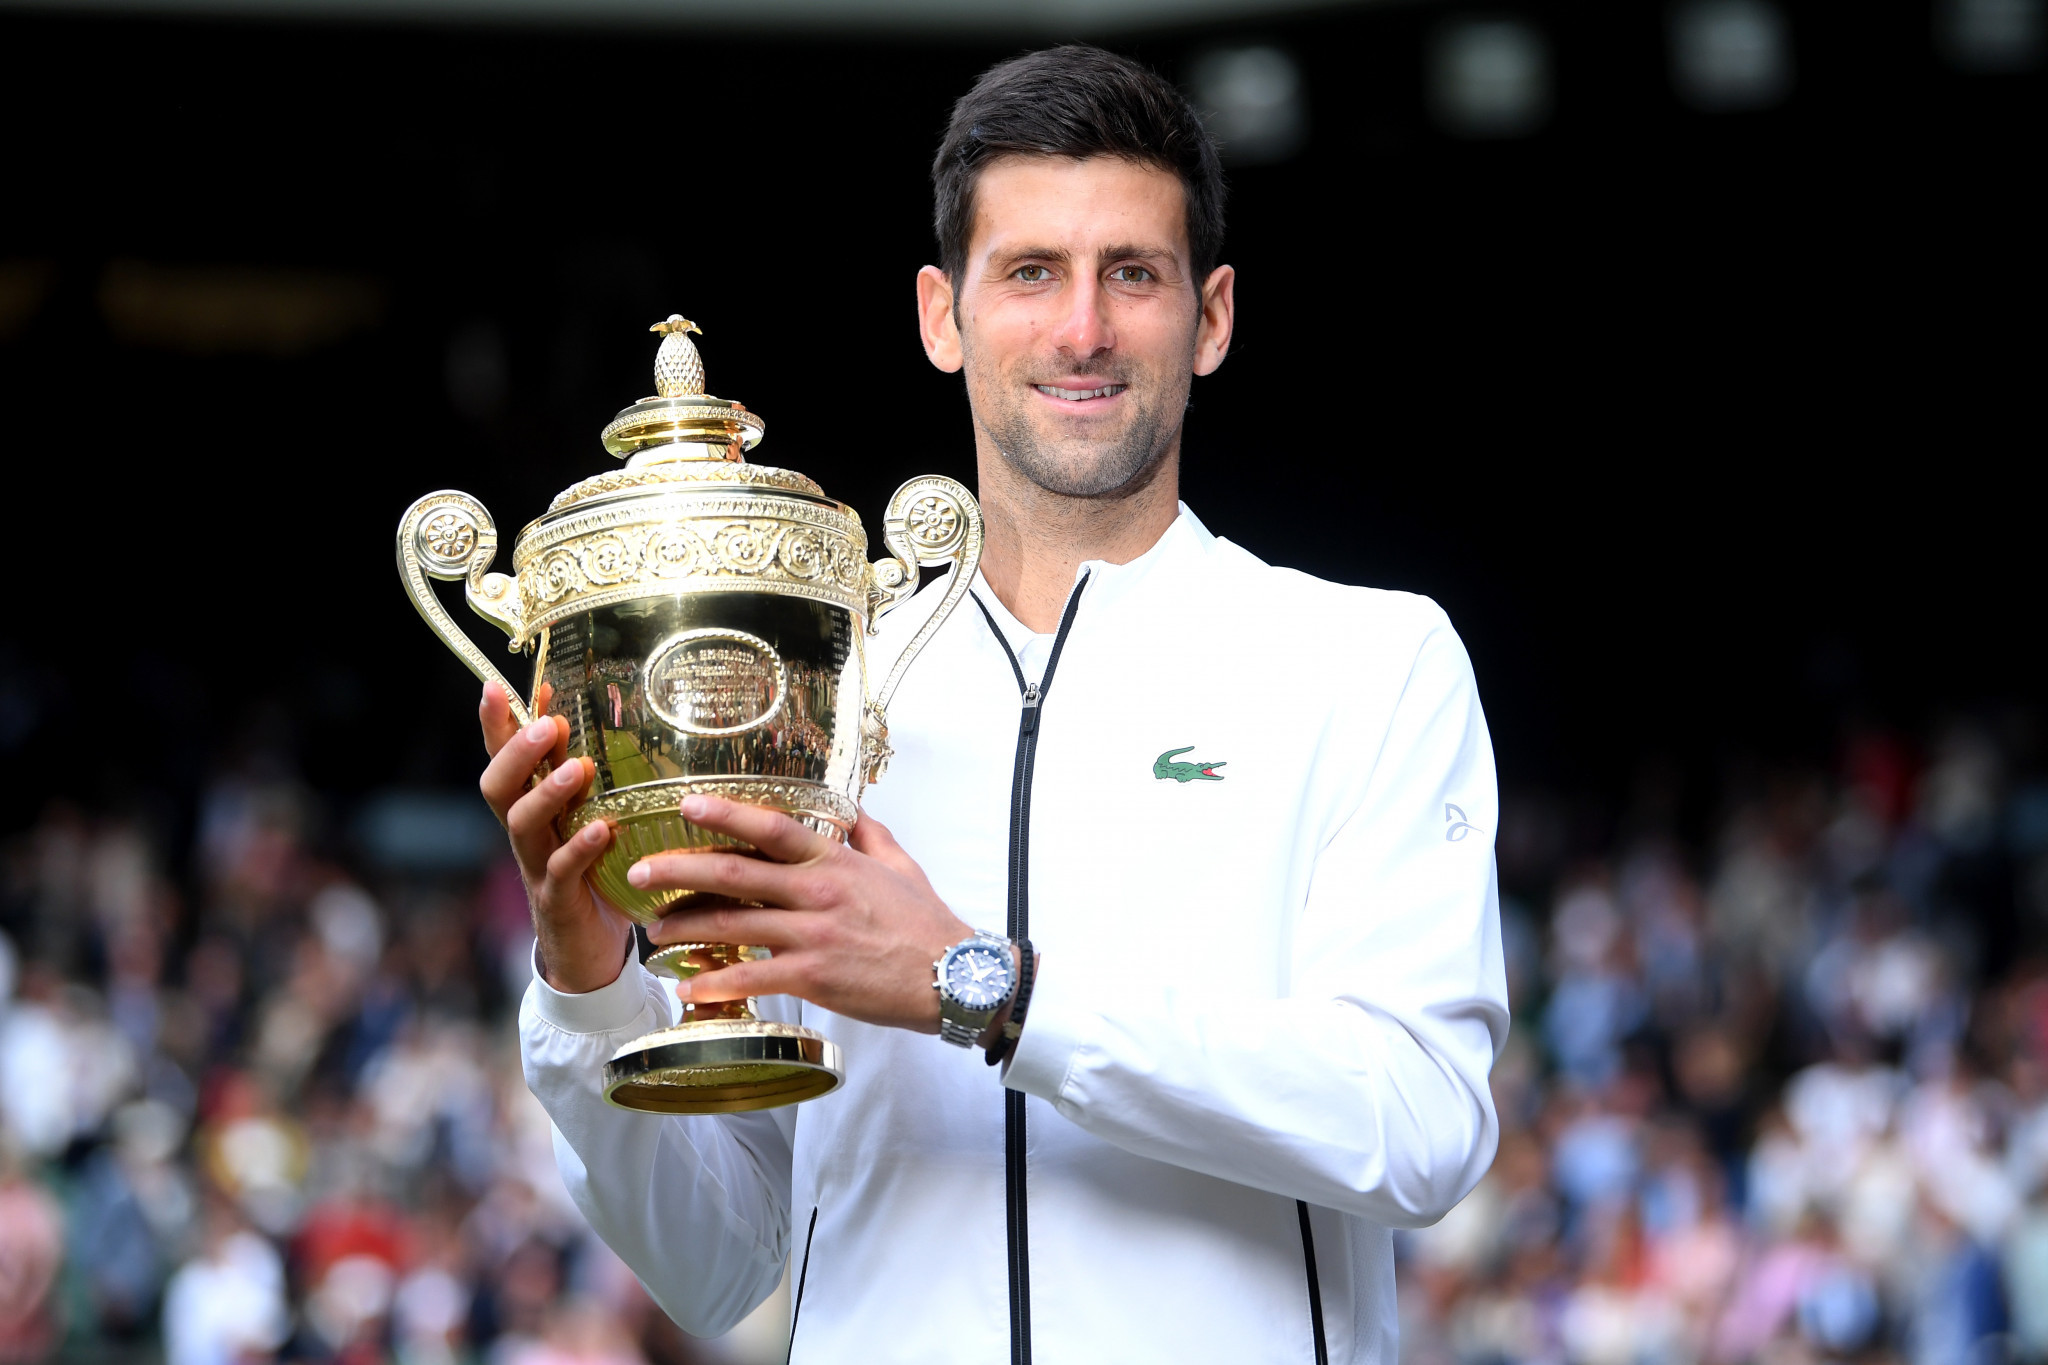 It was a fifth Wimbledon title for world number one Djokovic ©Getty Images